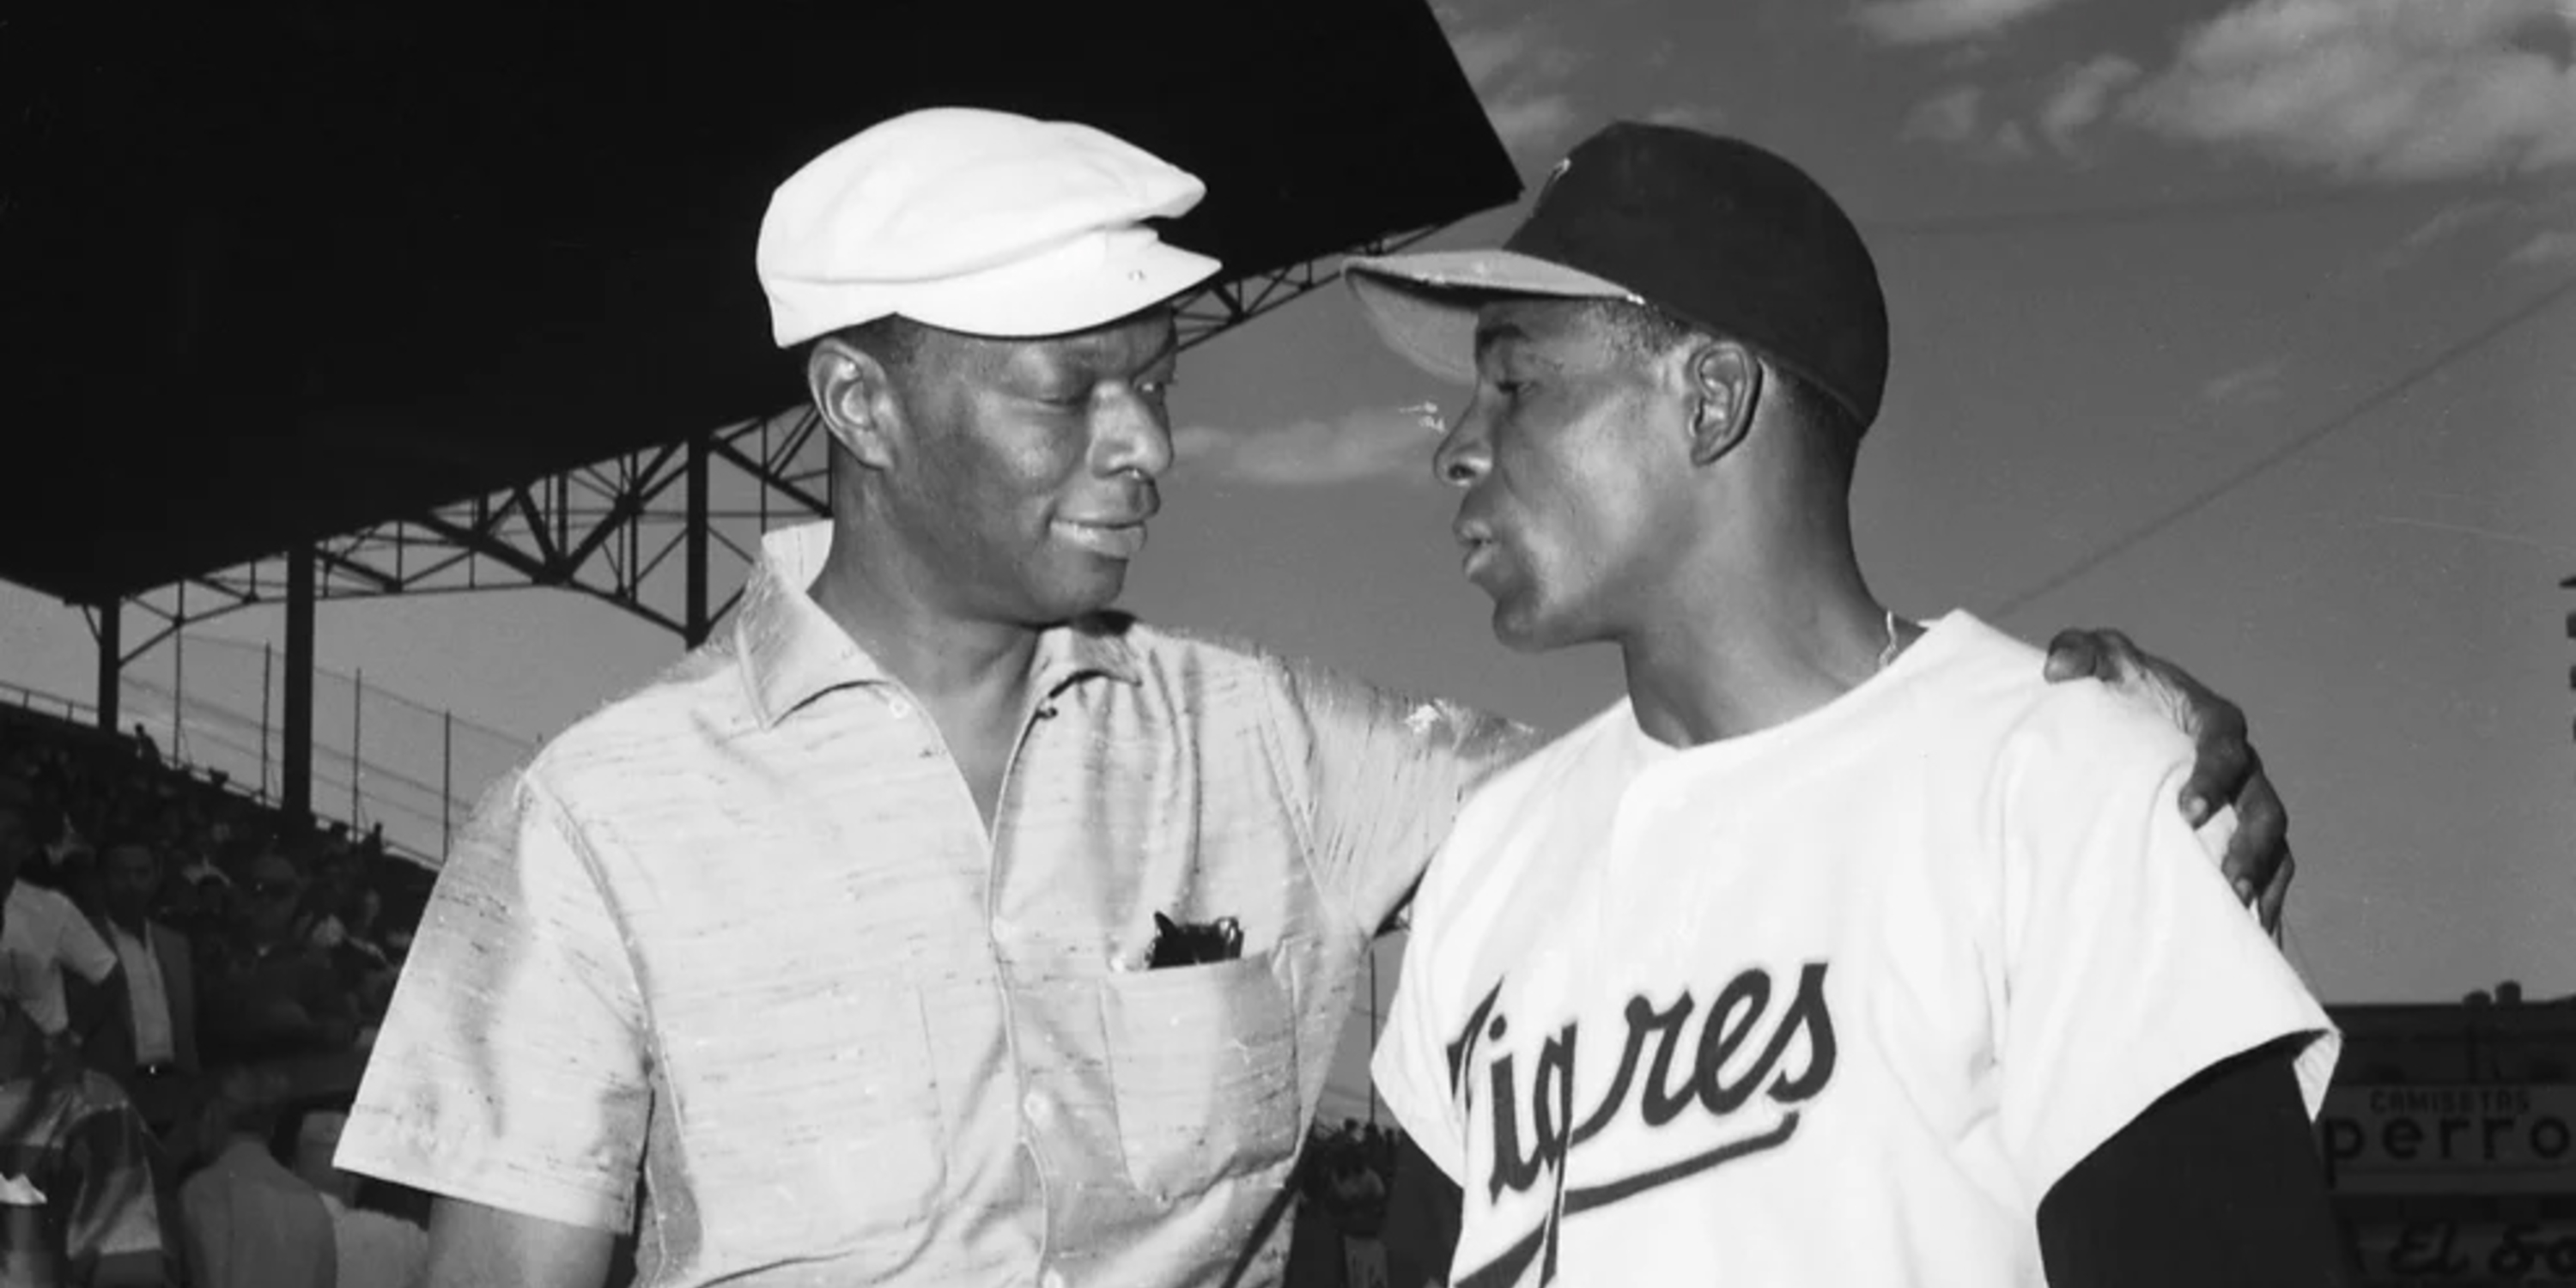 L to R - Nat King Cole and Orestes “Minnie” Minoso - Photo by Bettmann Collection/Getty Images